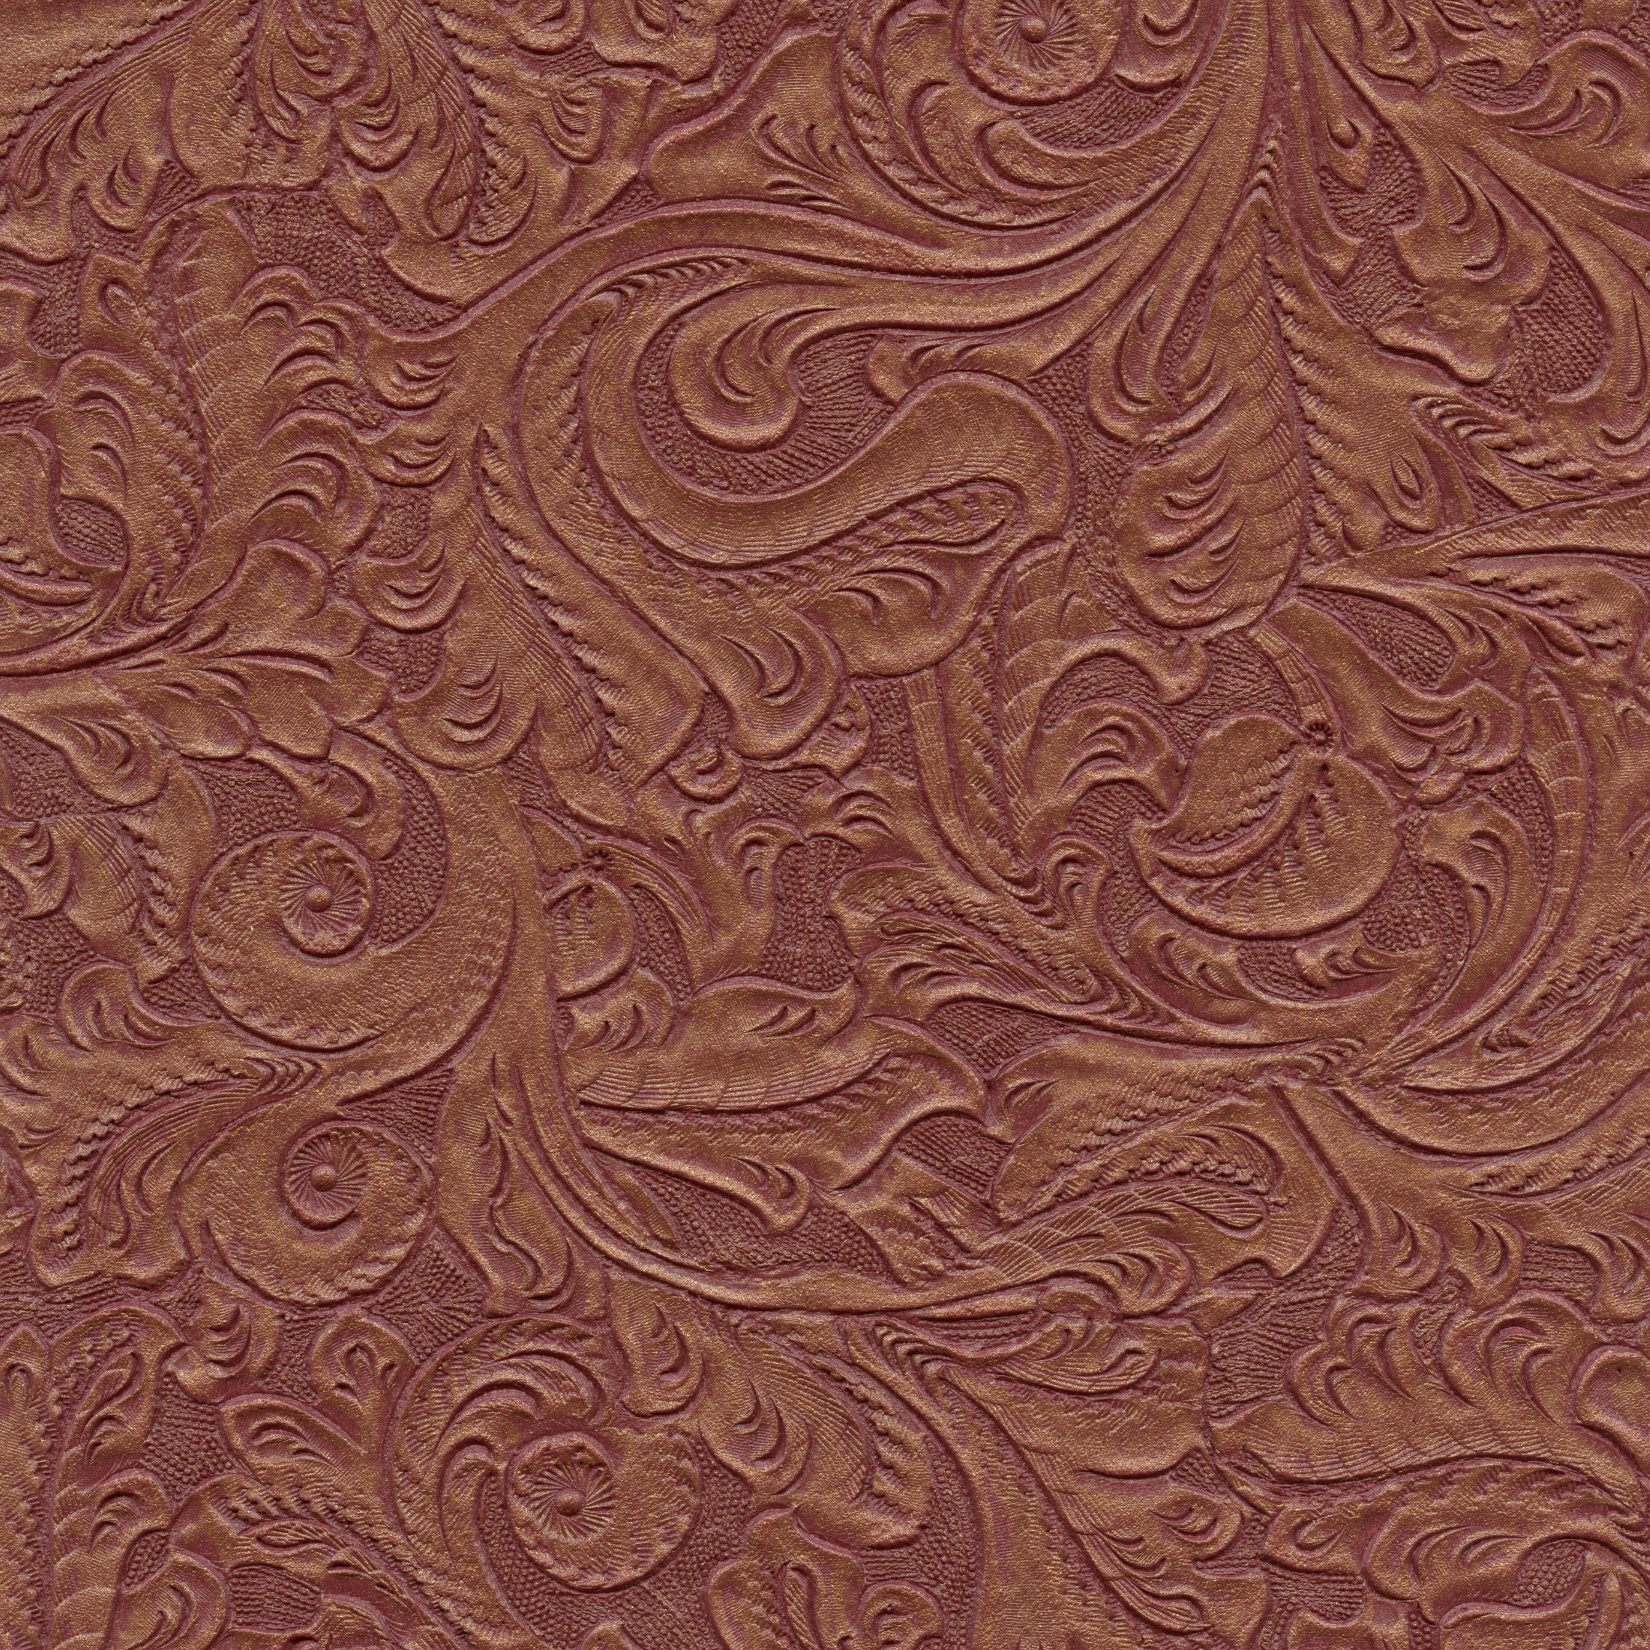 Tooled Leather Patterns Patterns in this style 1650x1650